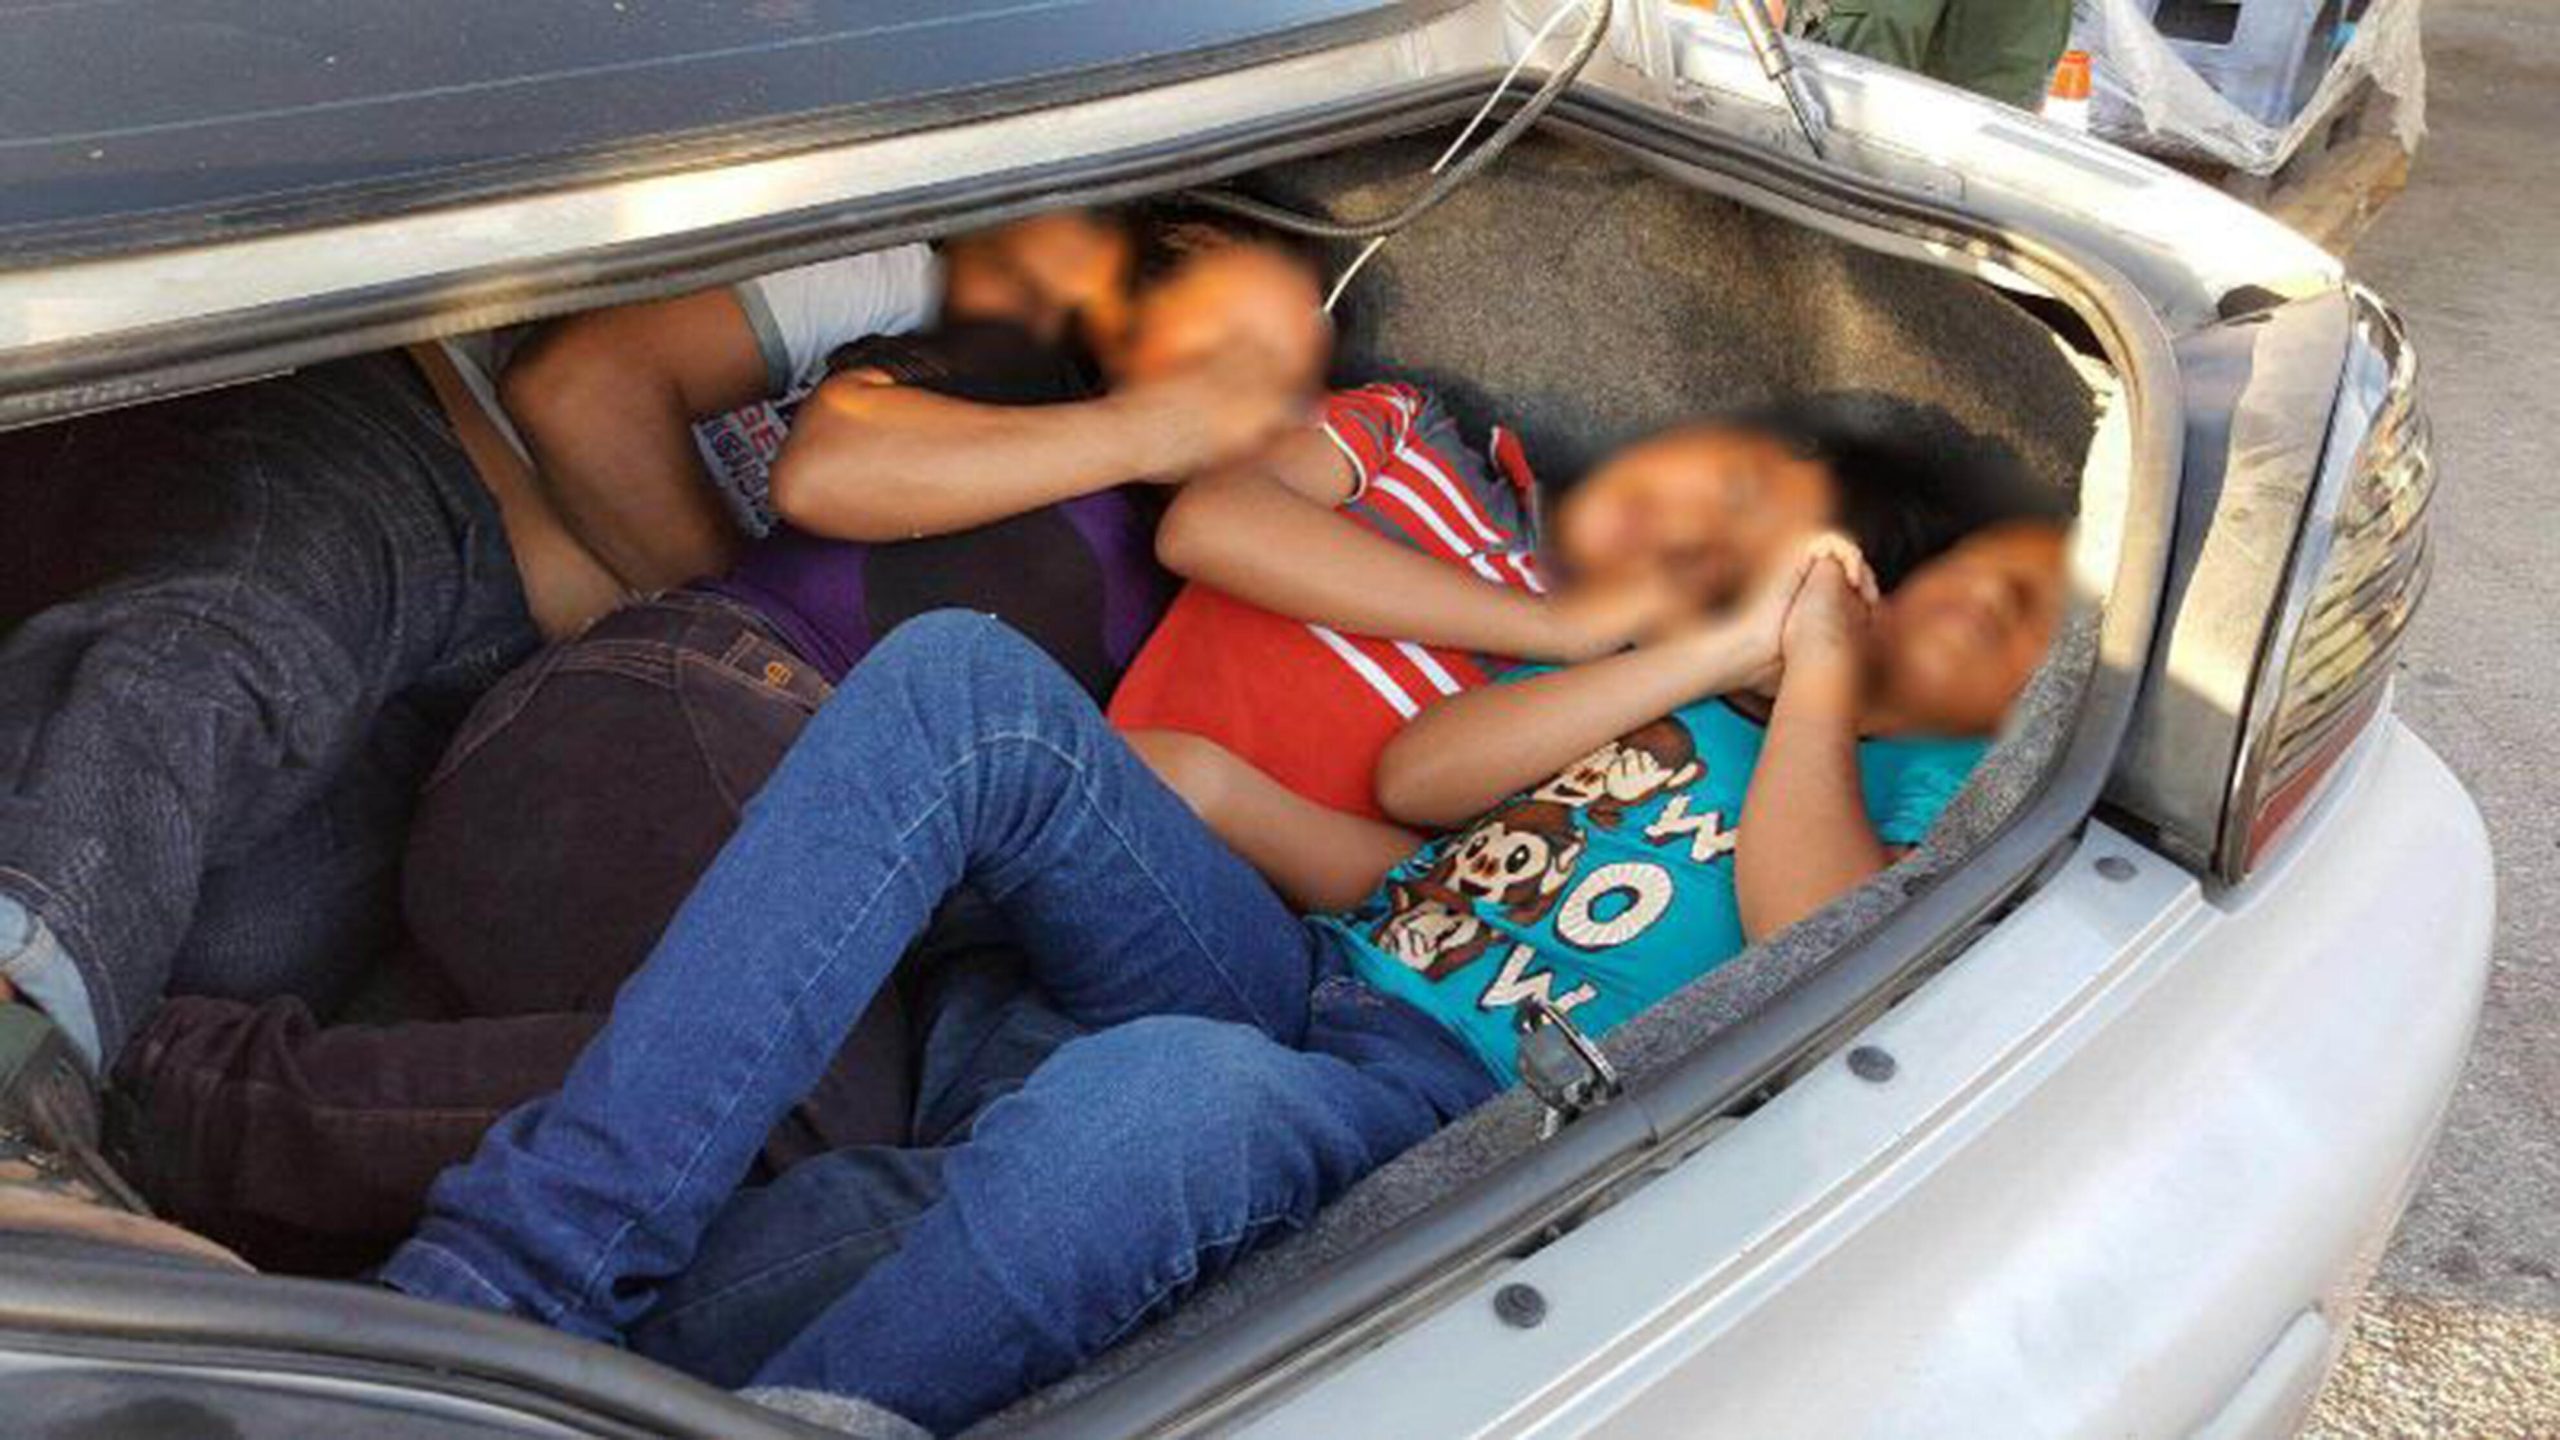 Smuggled illegal immigrants in car trunk. CBP photo.